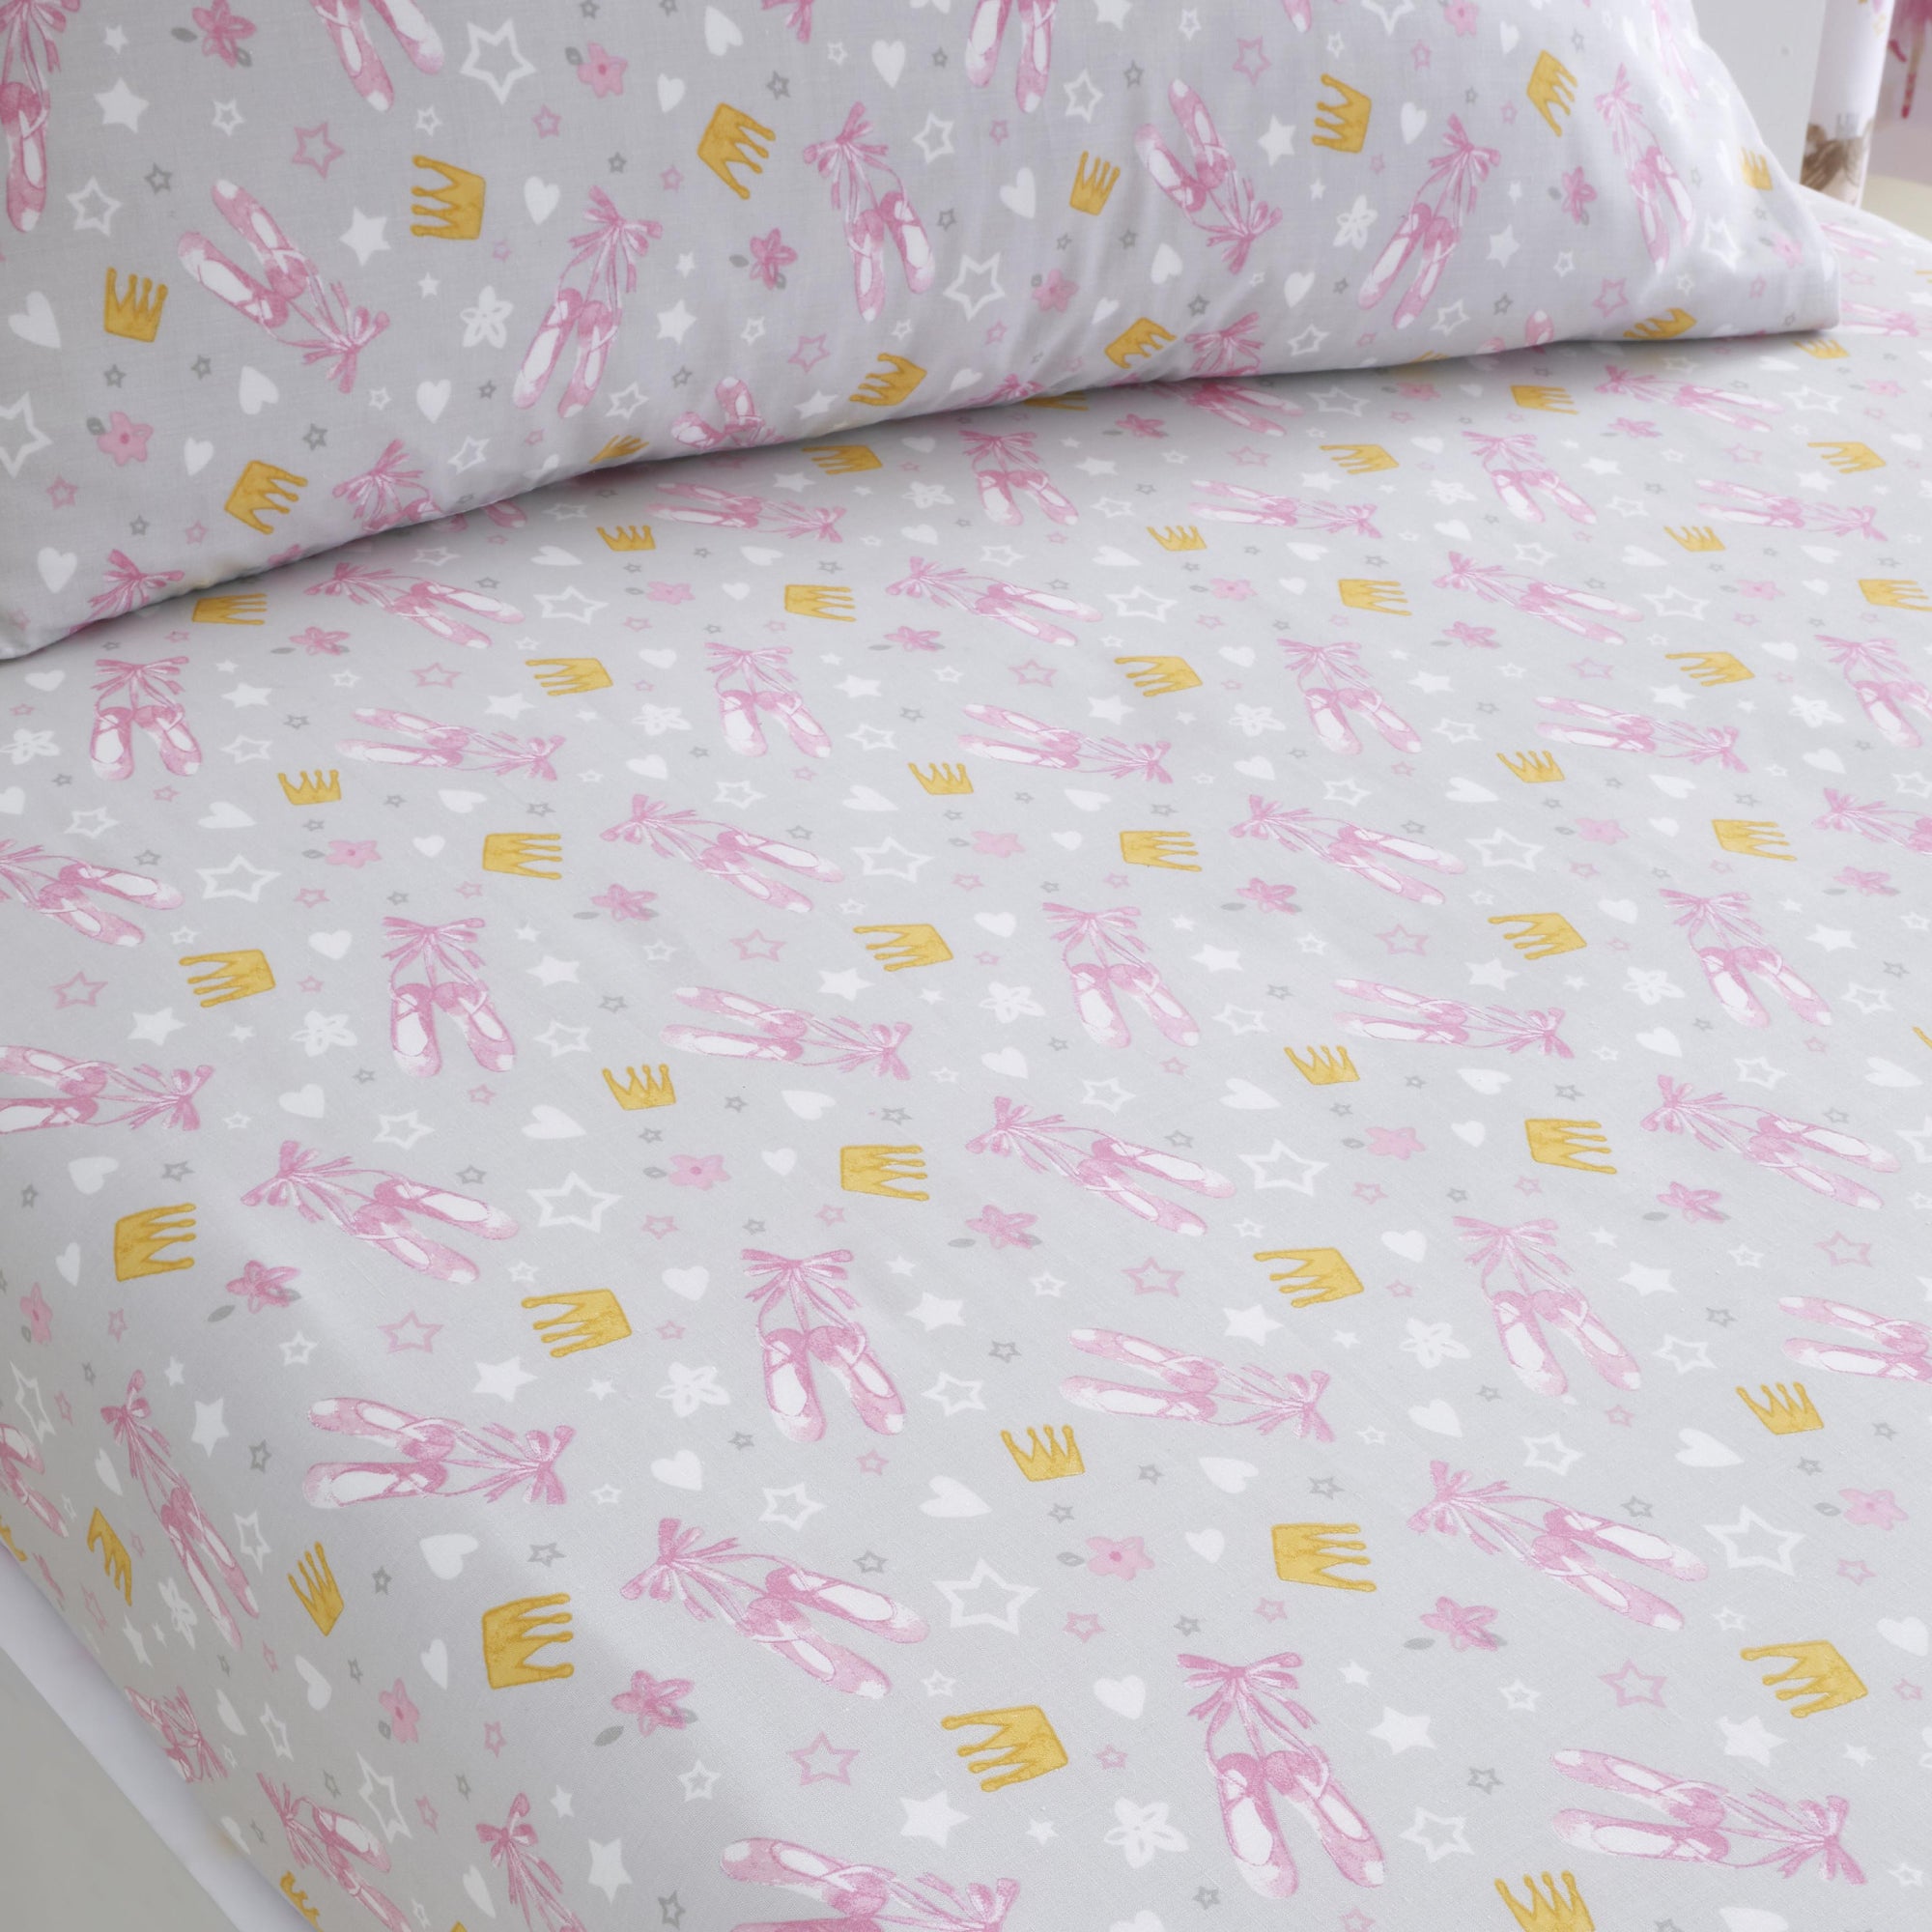 15cm Fitted Bed Sheet Ballet Dancer by Bedlam in Pink